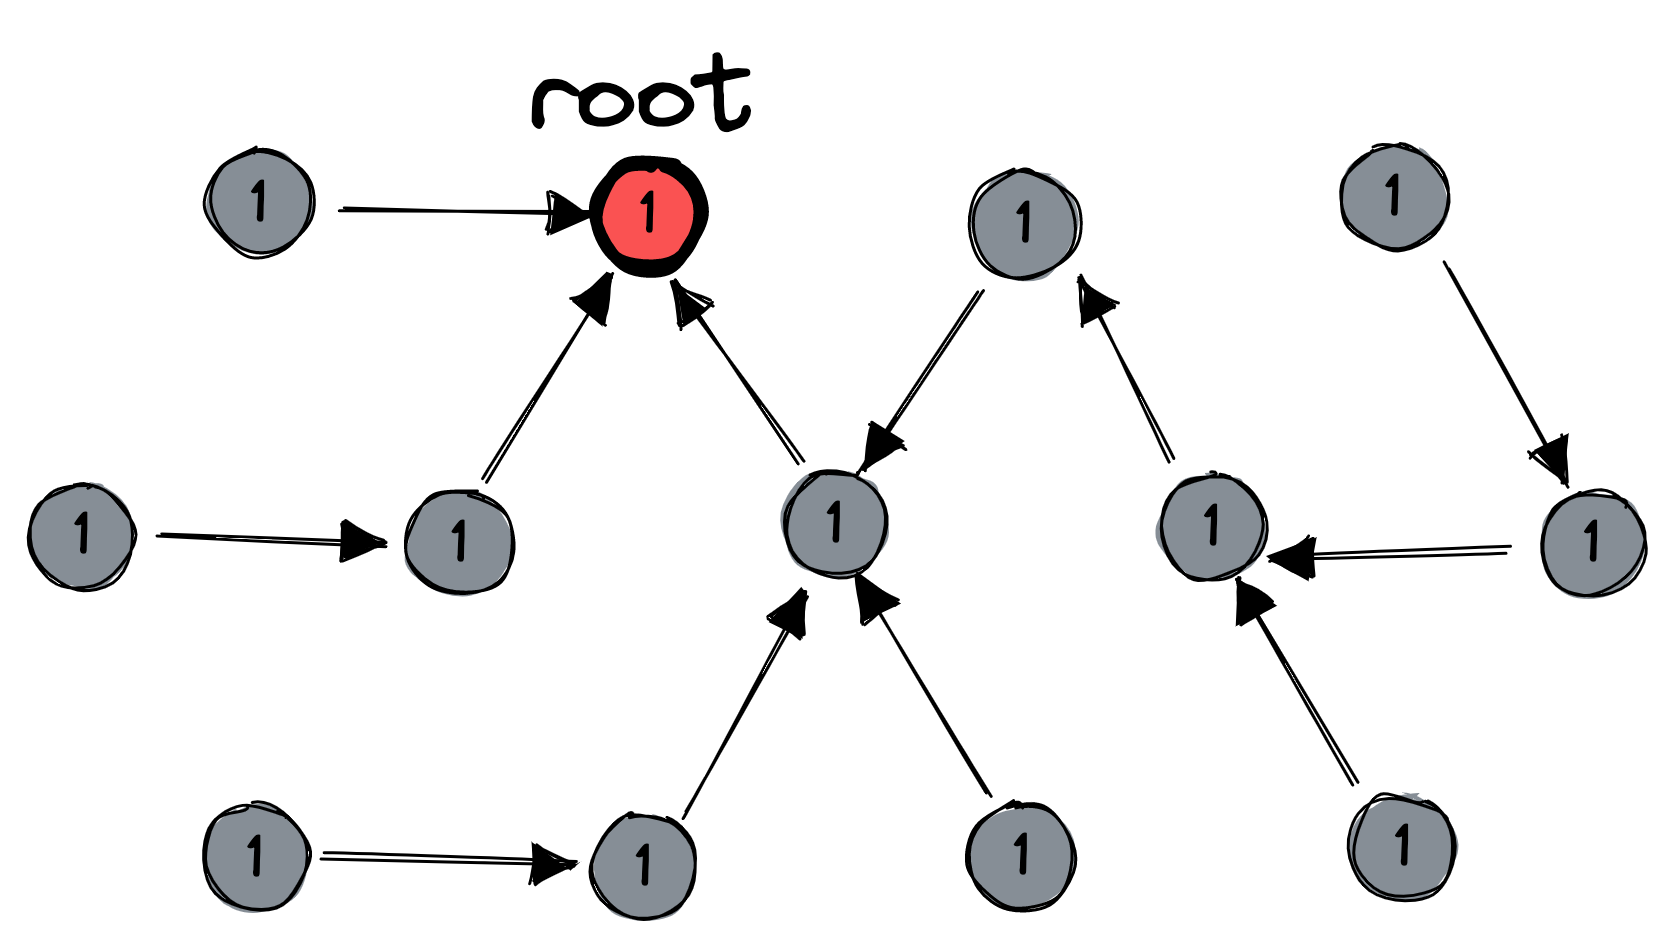 The same nodes, all labeled “one”.